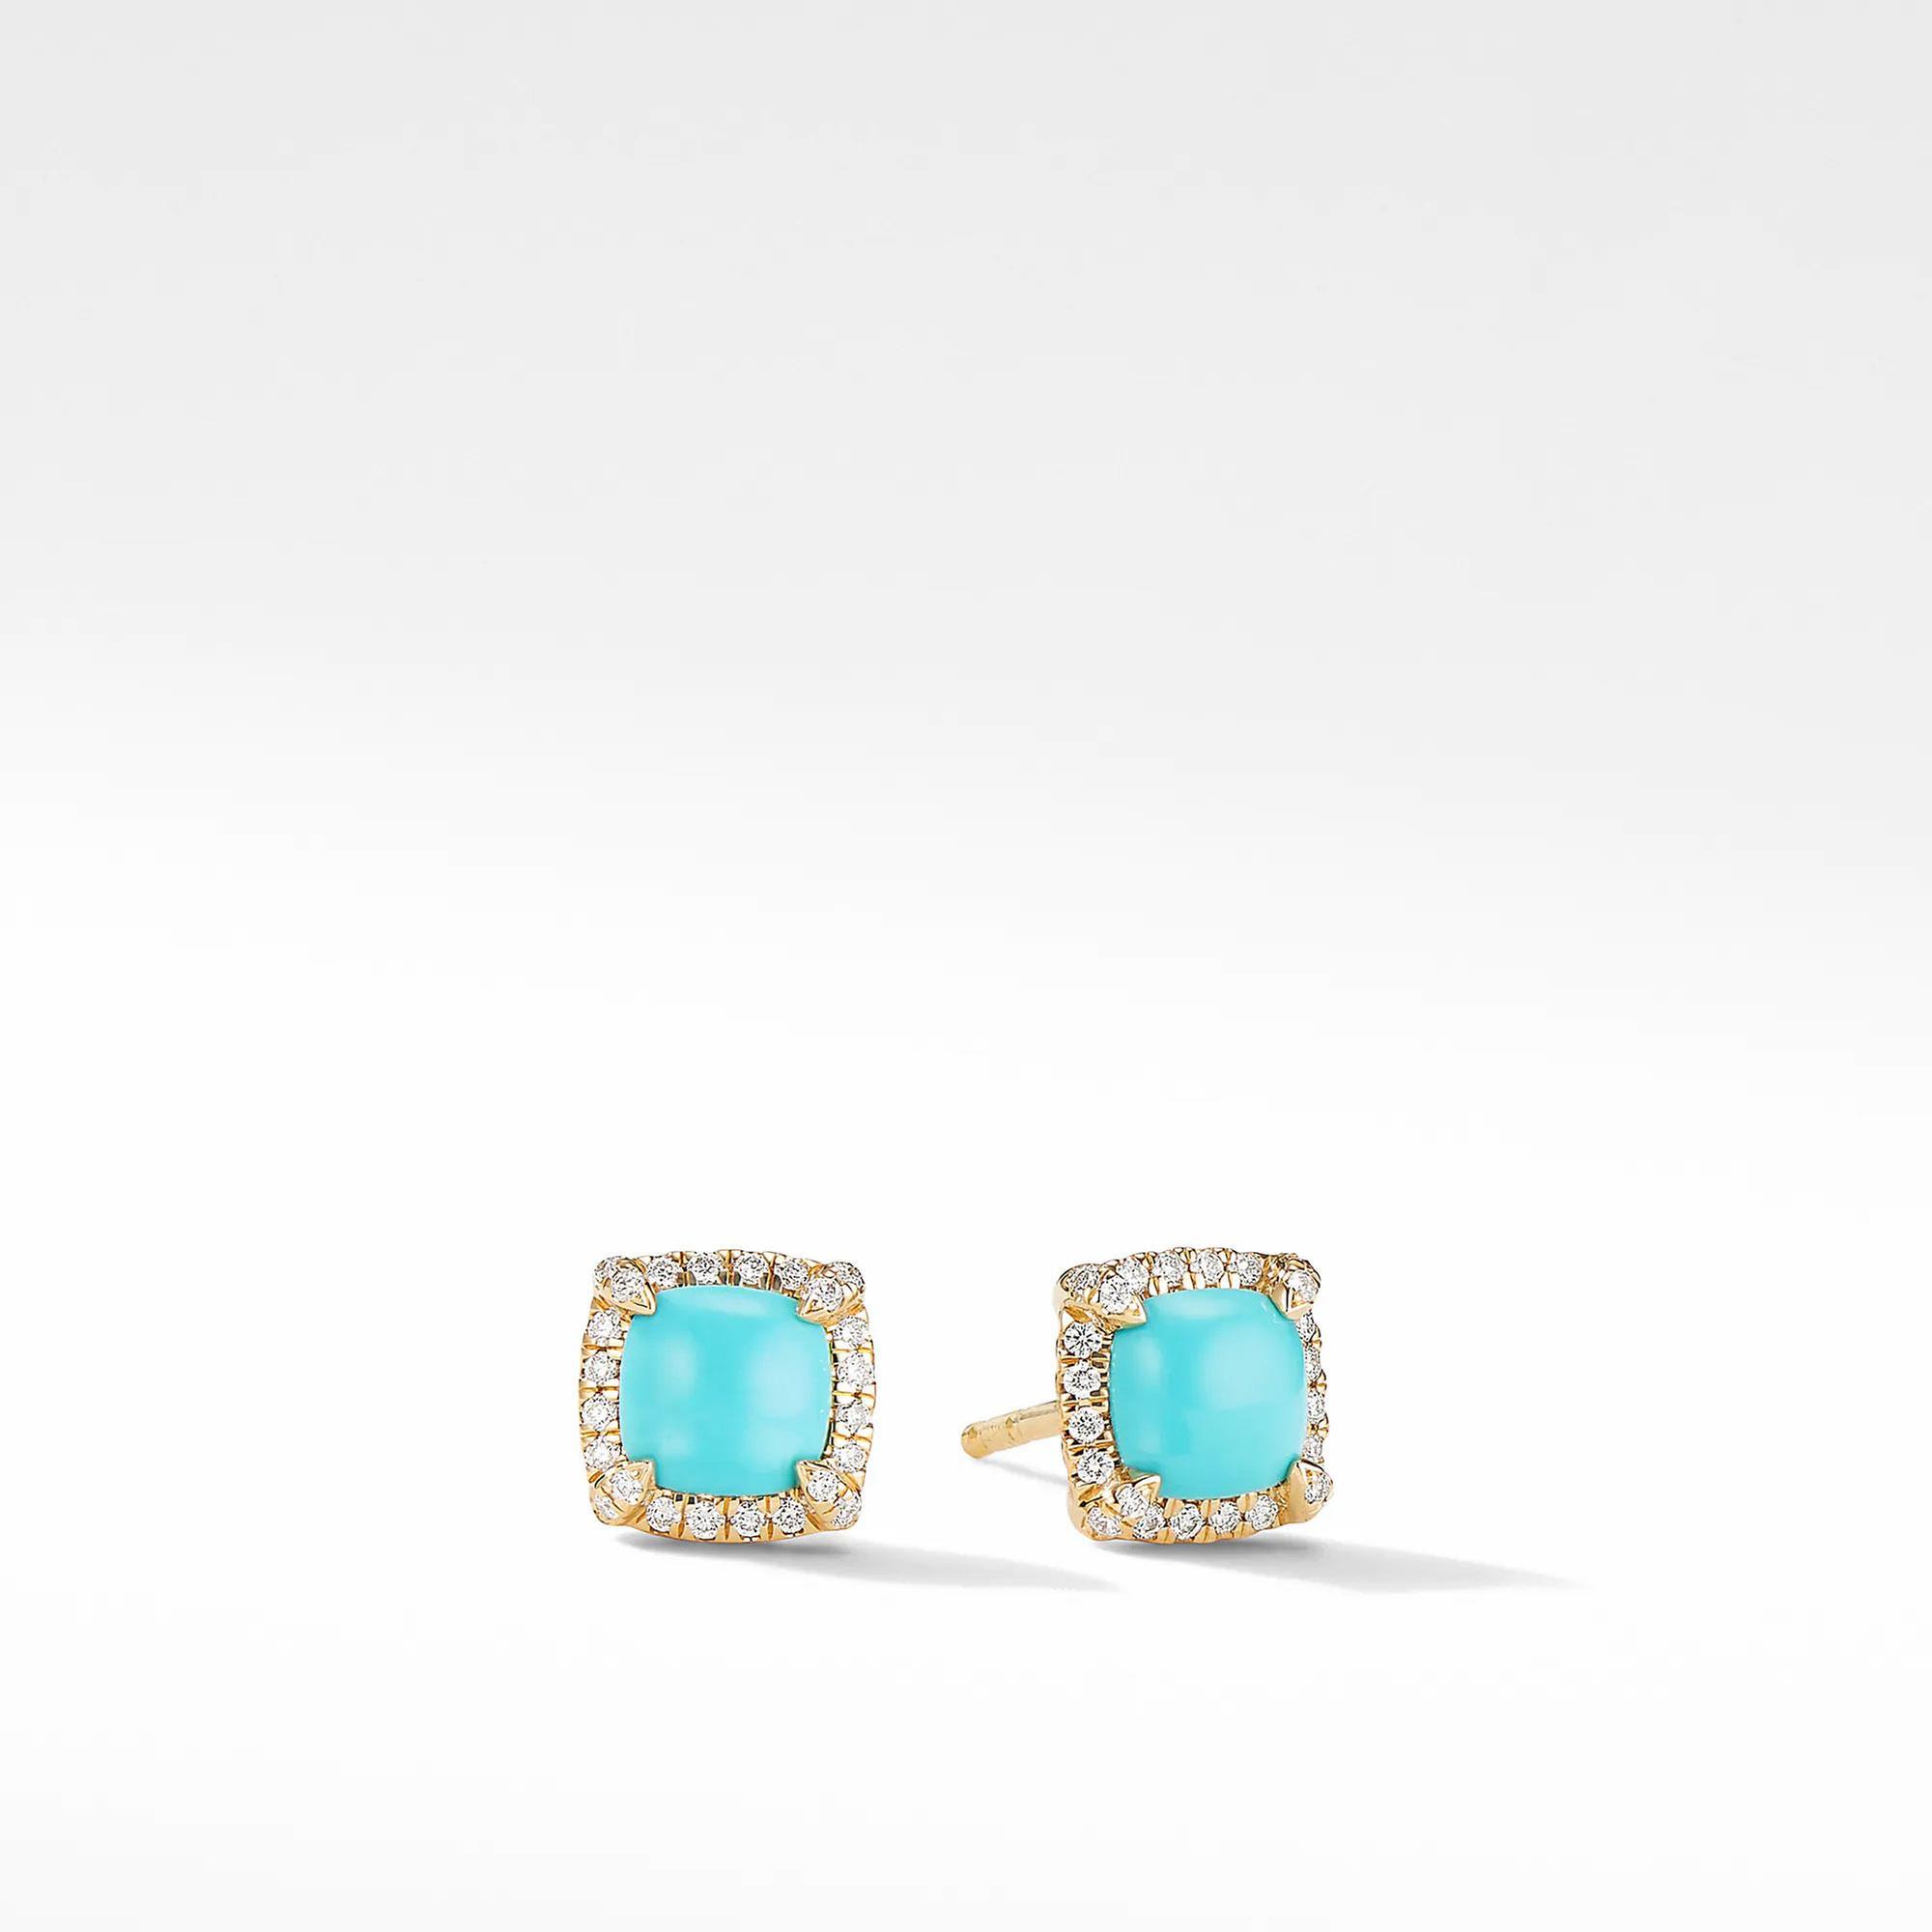 David Yurman Petite Chatelaine Pave Bezel Stud Earrings in 18k Yellow Gold with Turquoise